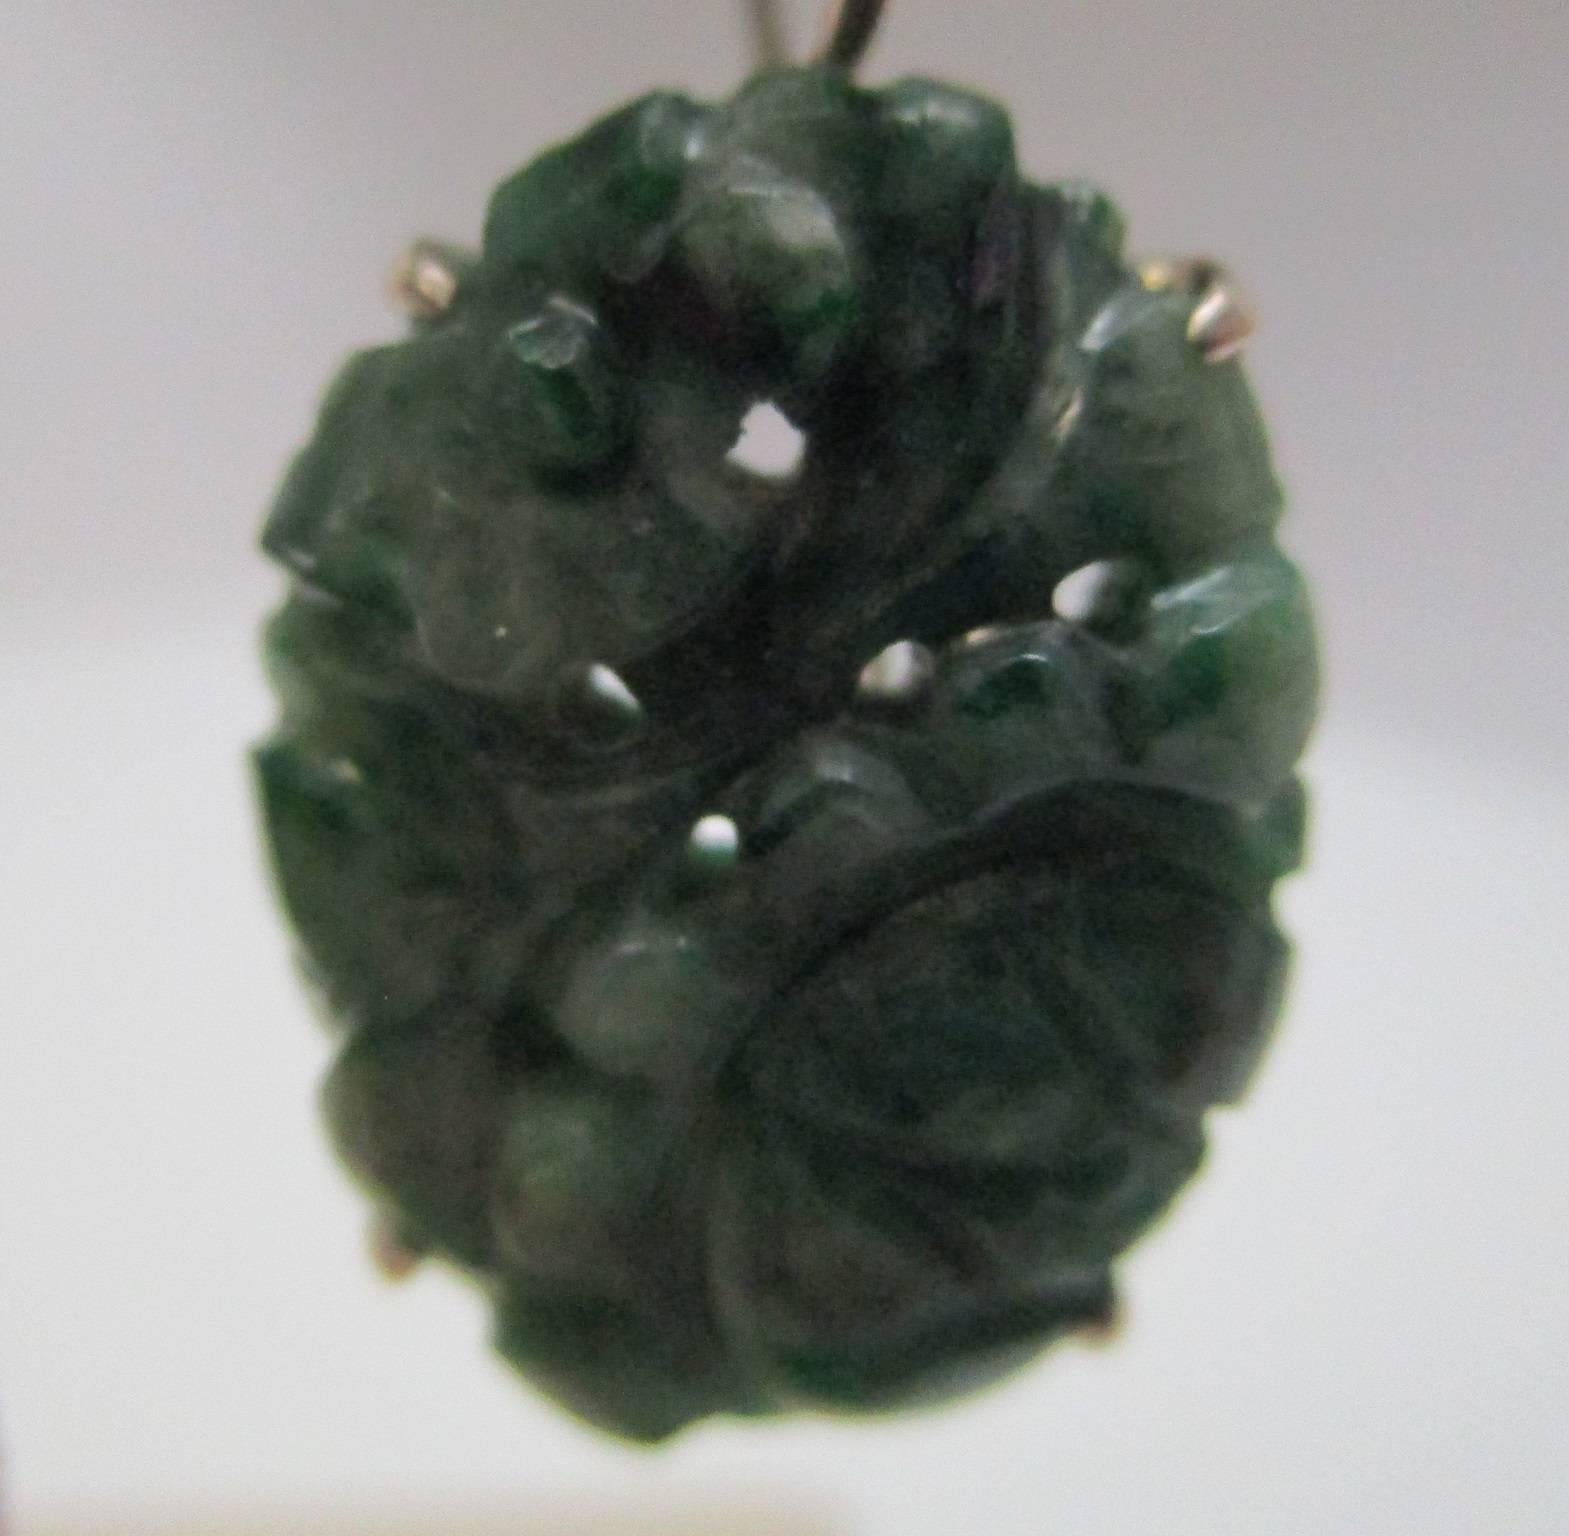 These carved nephrite jade earrings have a sterling silver frame and hook. Made in c, 1910, during the Arts & Crafts period, they display lovely pierced carving in a floral motif. You will fall in love with the simple beauty of these